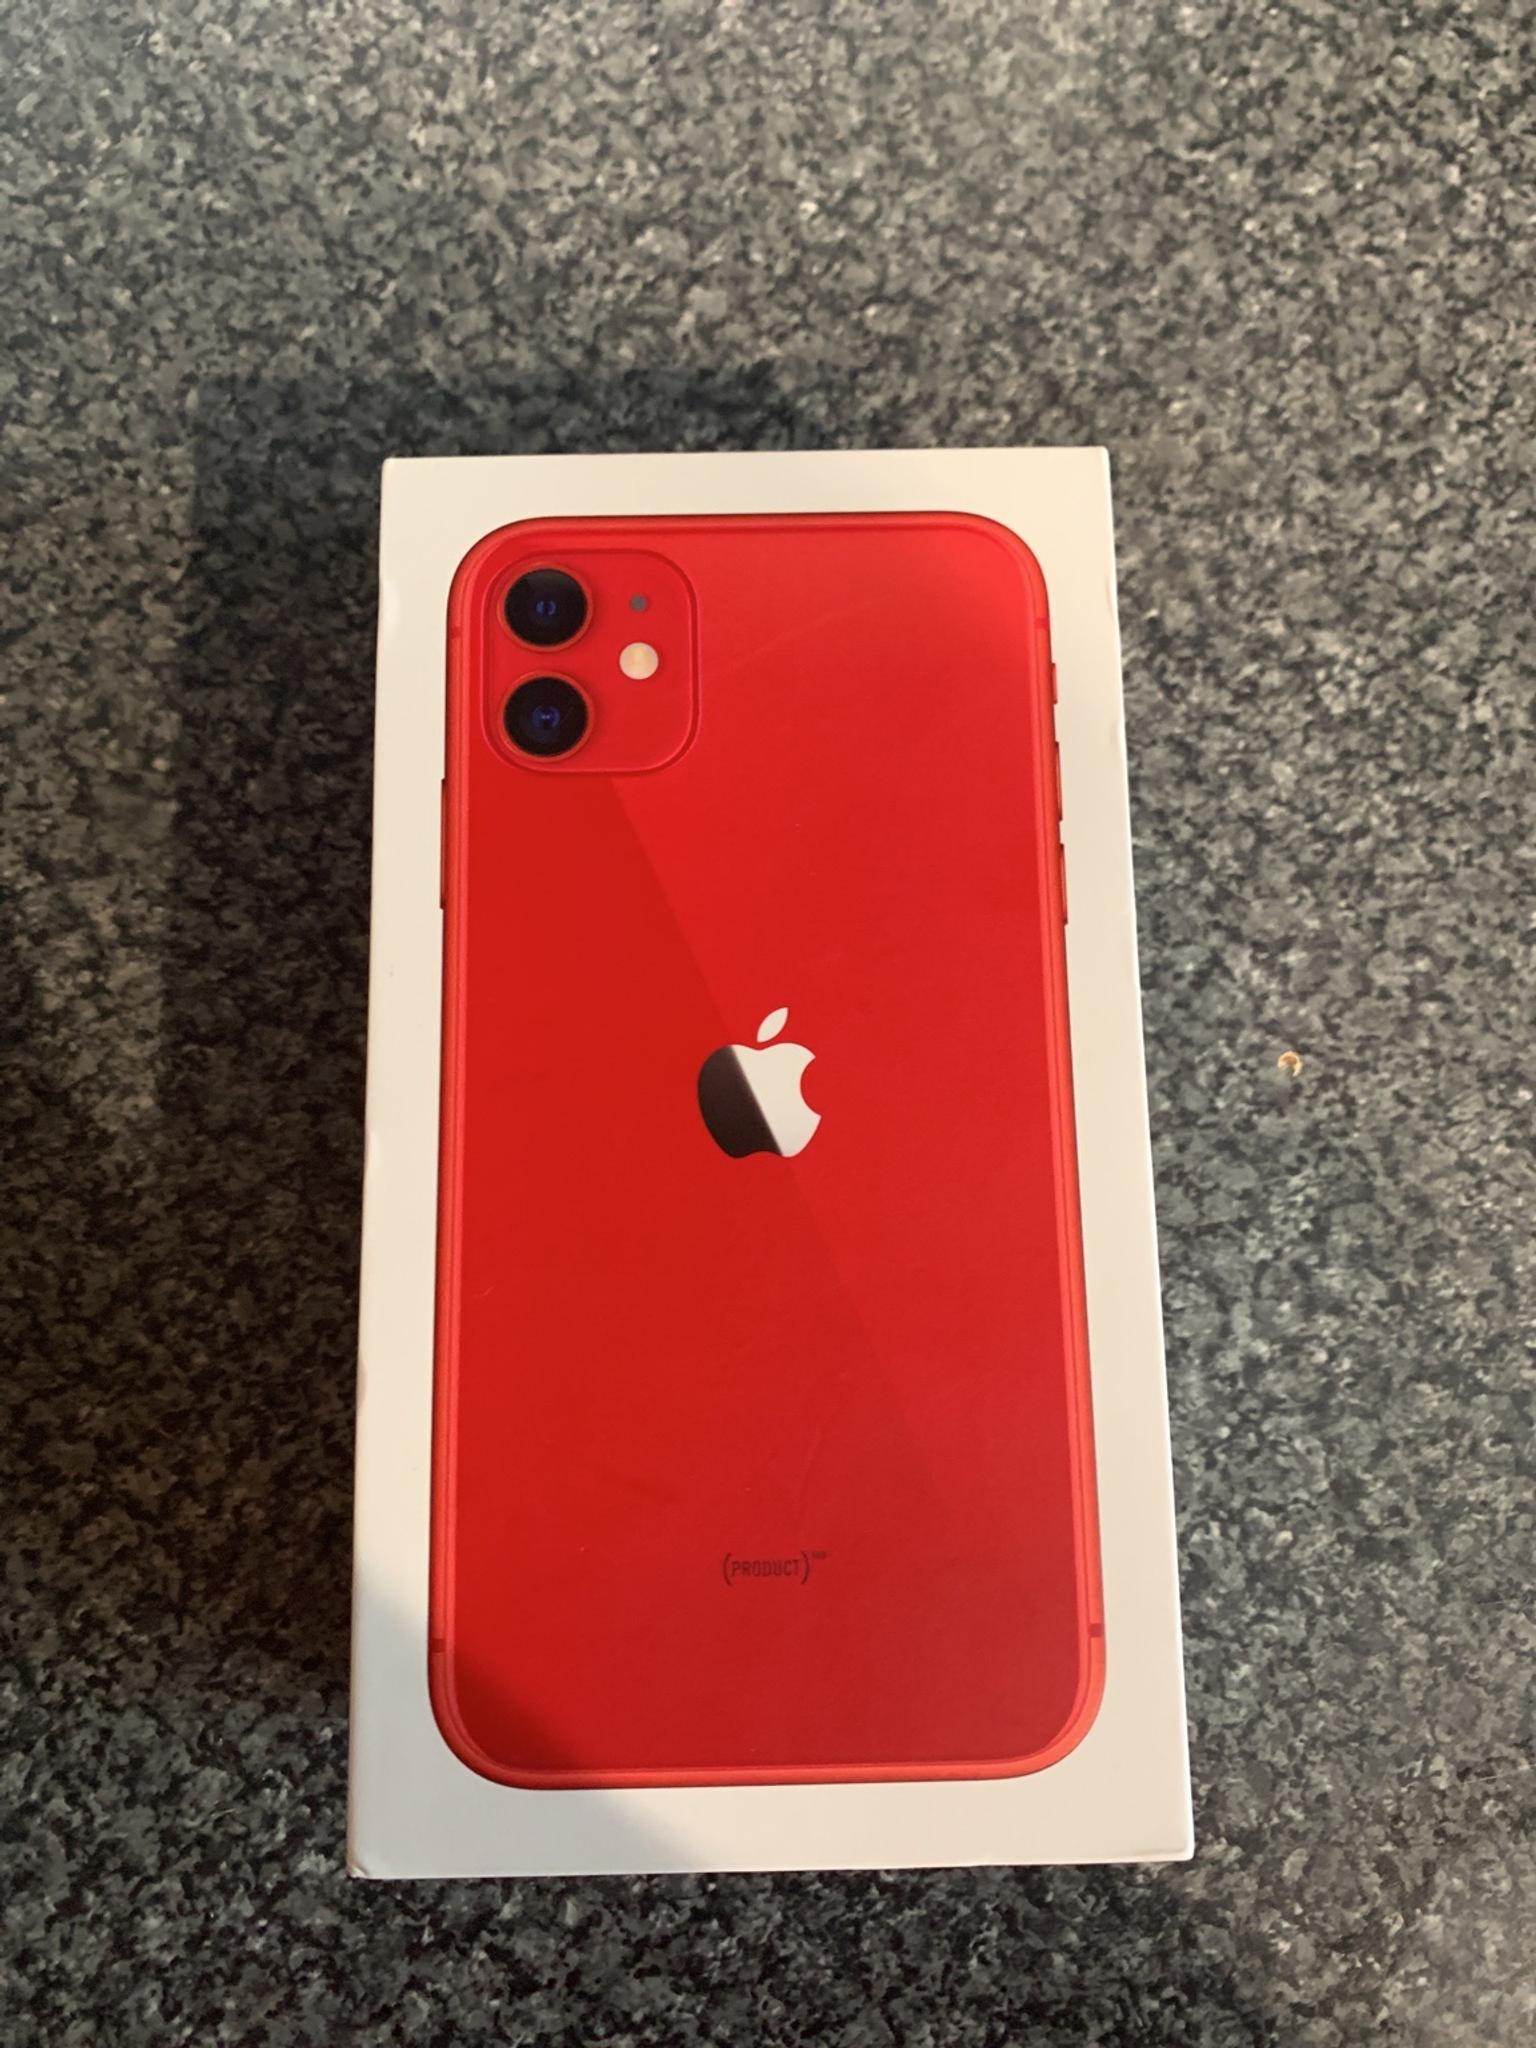 Iphone 11 Red 64gb Cracked Screen Unloced In Da8 Bexley For 500 00 For Sale Shpock